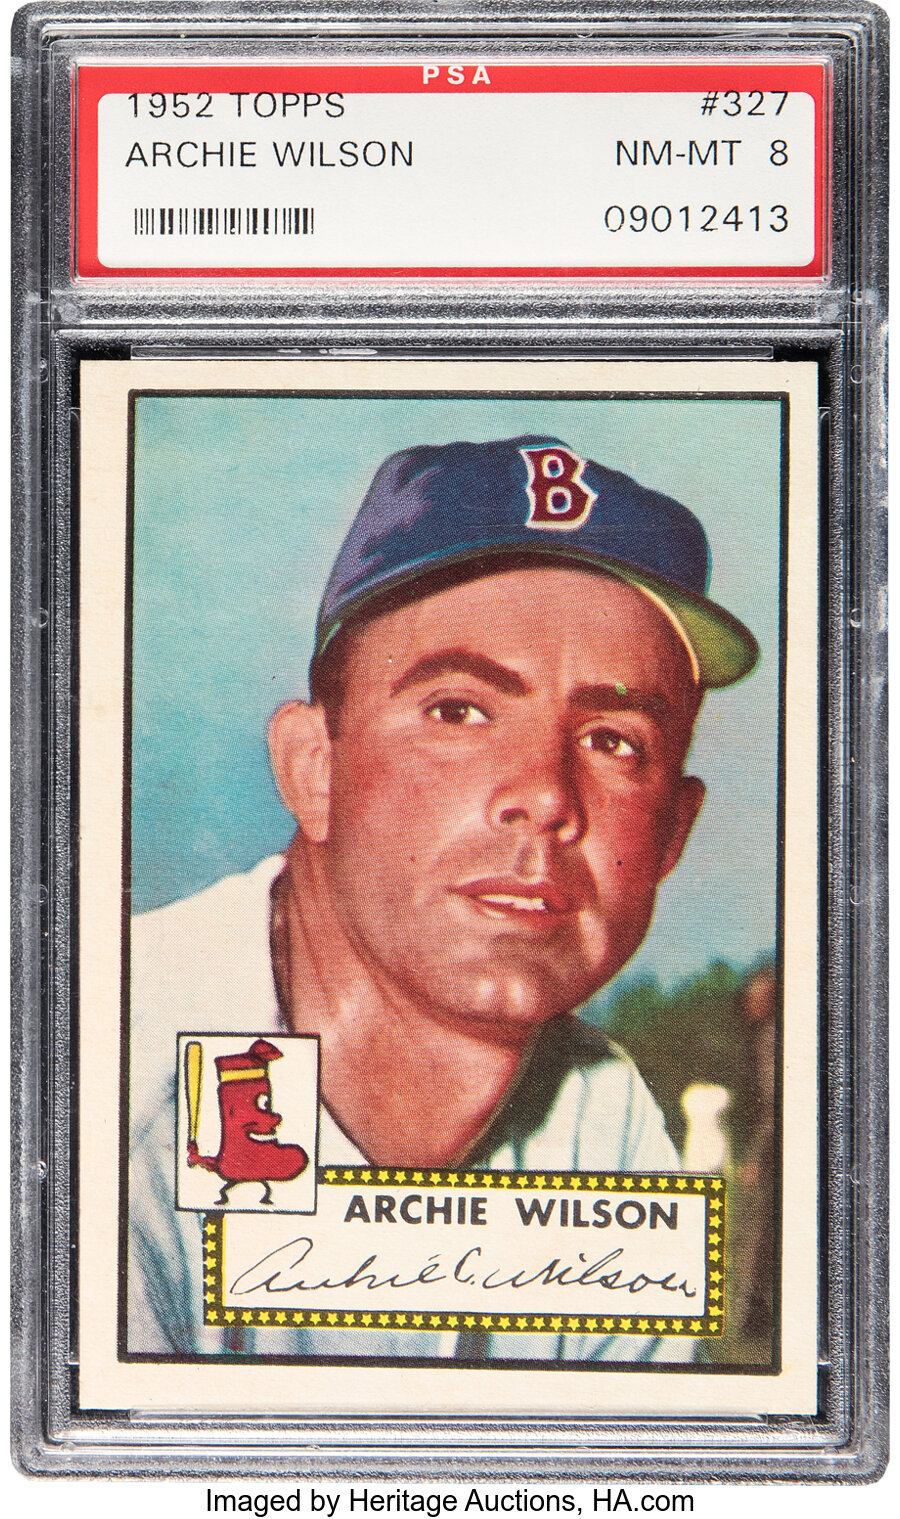 1952 Topps Archie Wilson Rookie #327 PSA NM-MT 8 - Four Higher